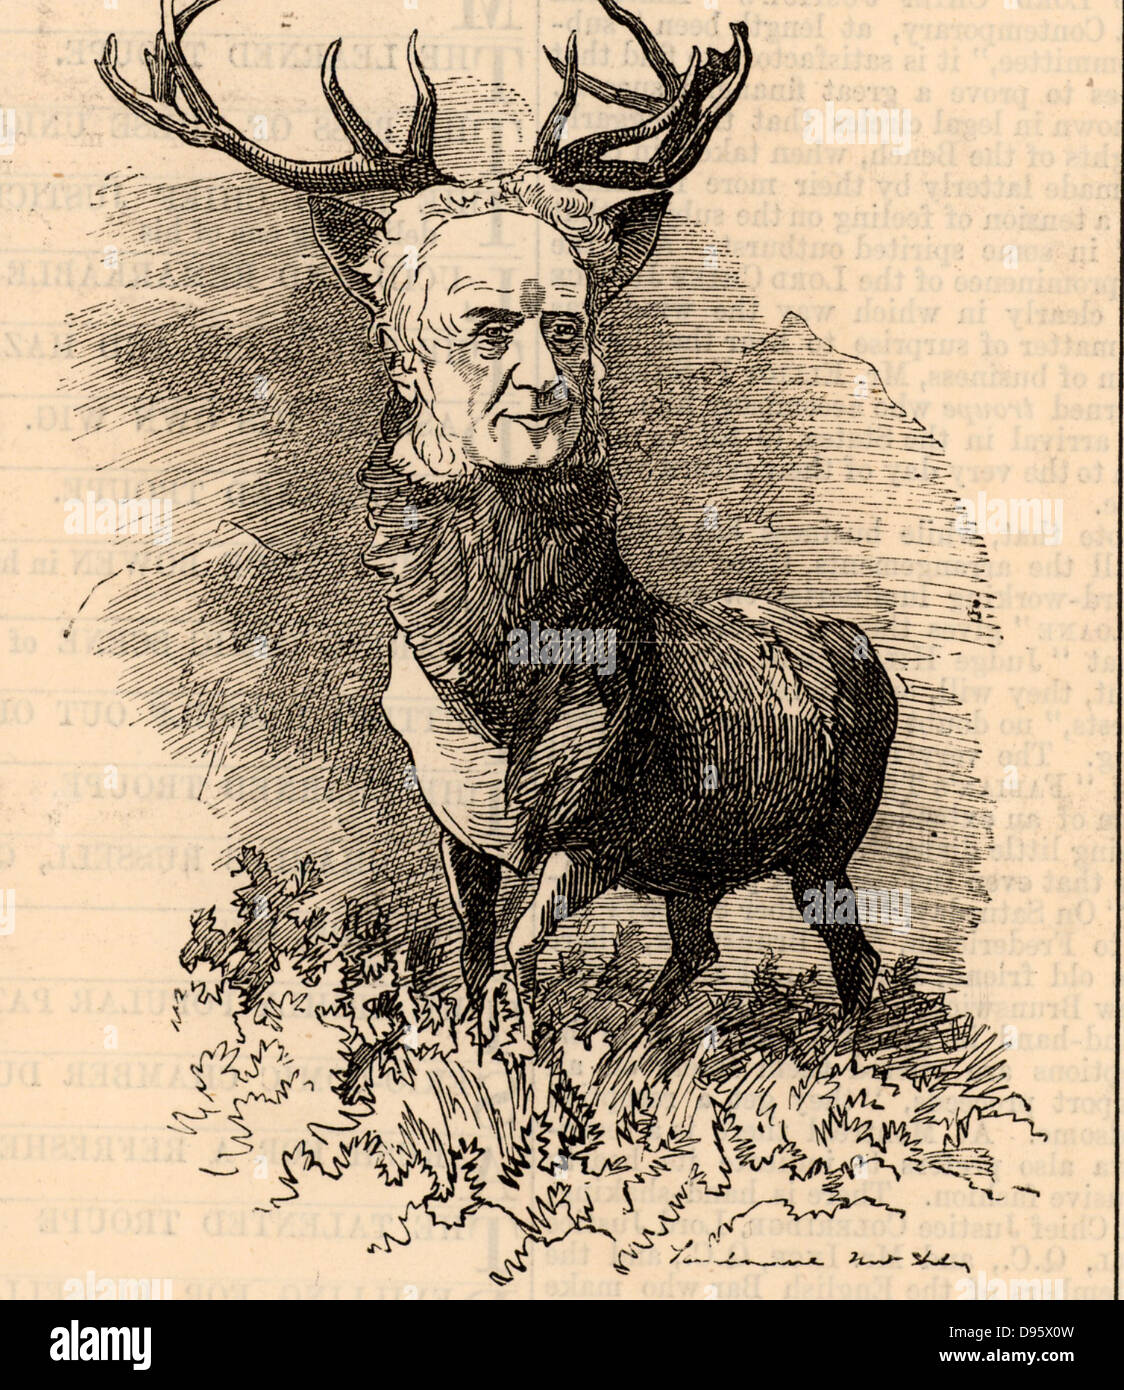 Walter Francis Scott, 5th Duke of Buccleuch and 7th Duke of Queensbury (1806-1884) Scottish nobleman and landowner.  Cartoon by Edward Linley Sambourne in the Punch's Fancy Portraits series from 'Punch' (London, 15 August 1884). Stock Photo